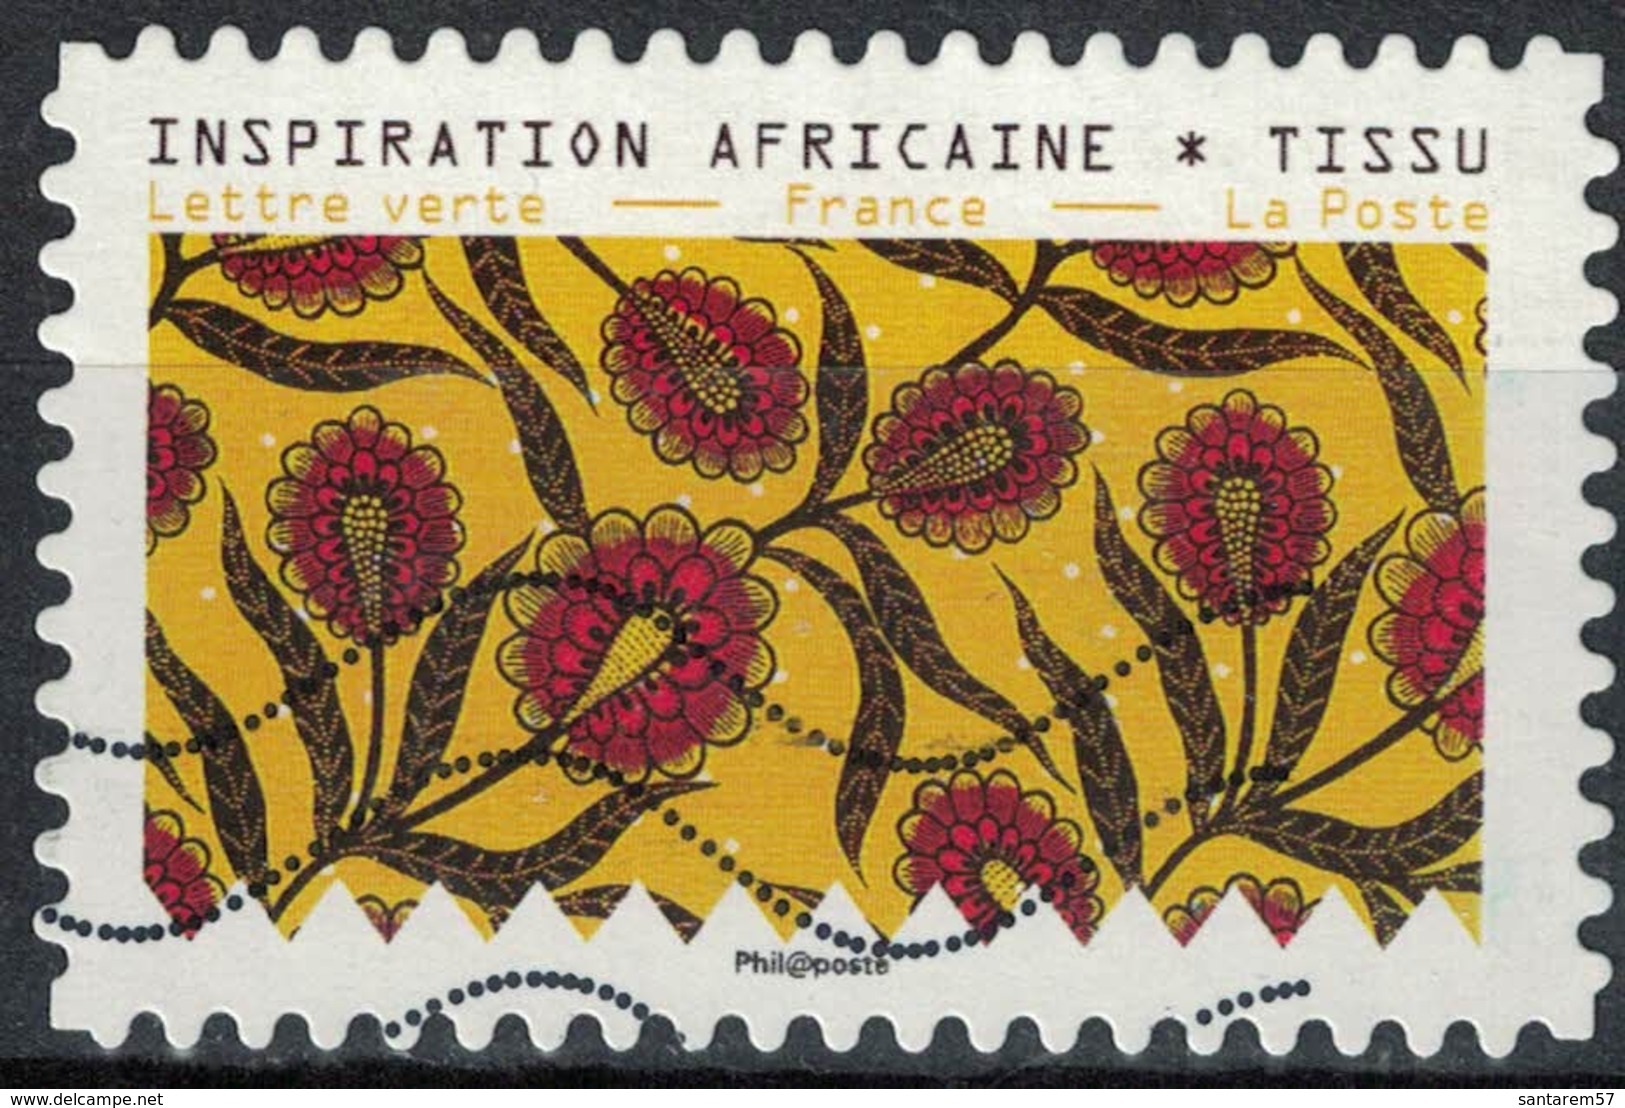 France 2019 Oblitéré Used Tissus Motifs Nature Inspiration Africaine Timbre 12 - Gebraucht